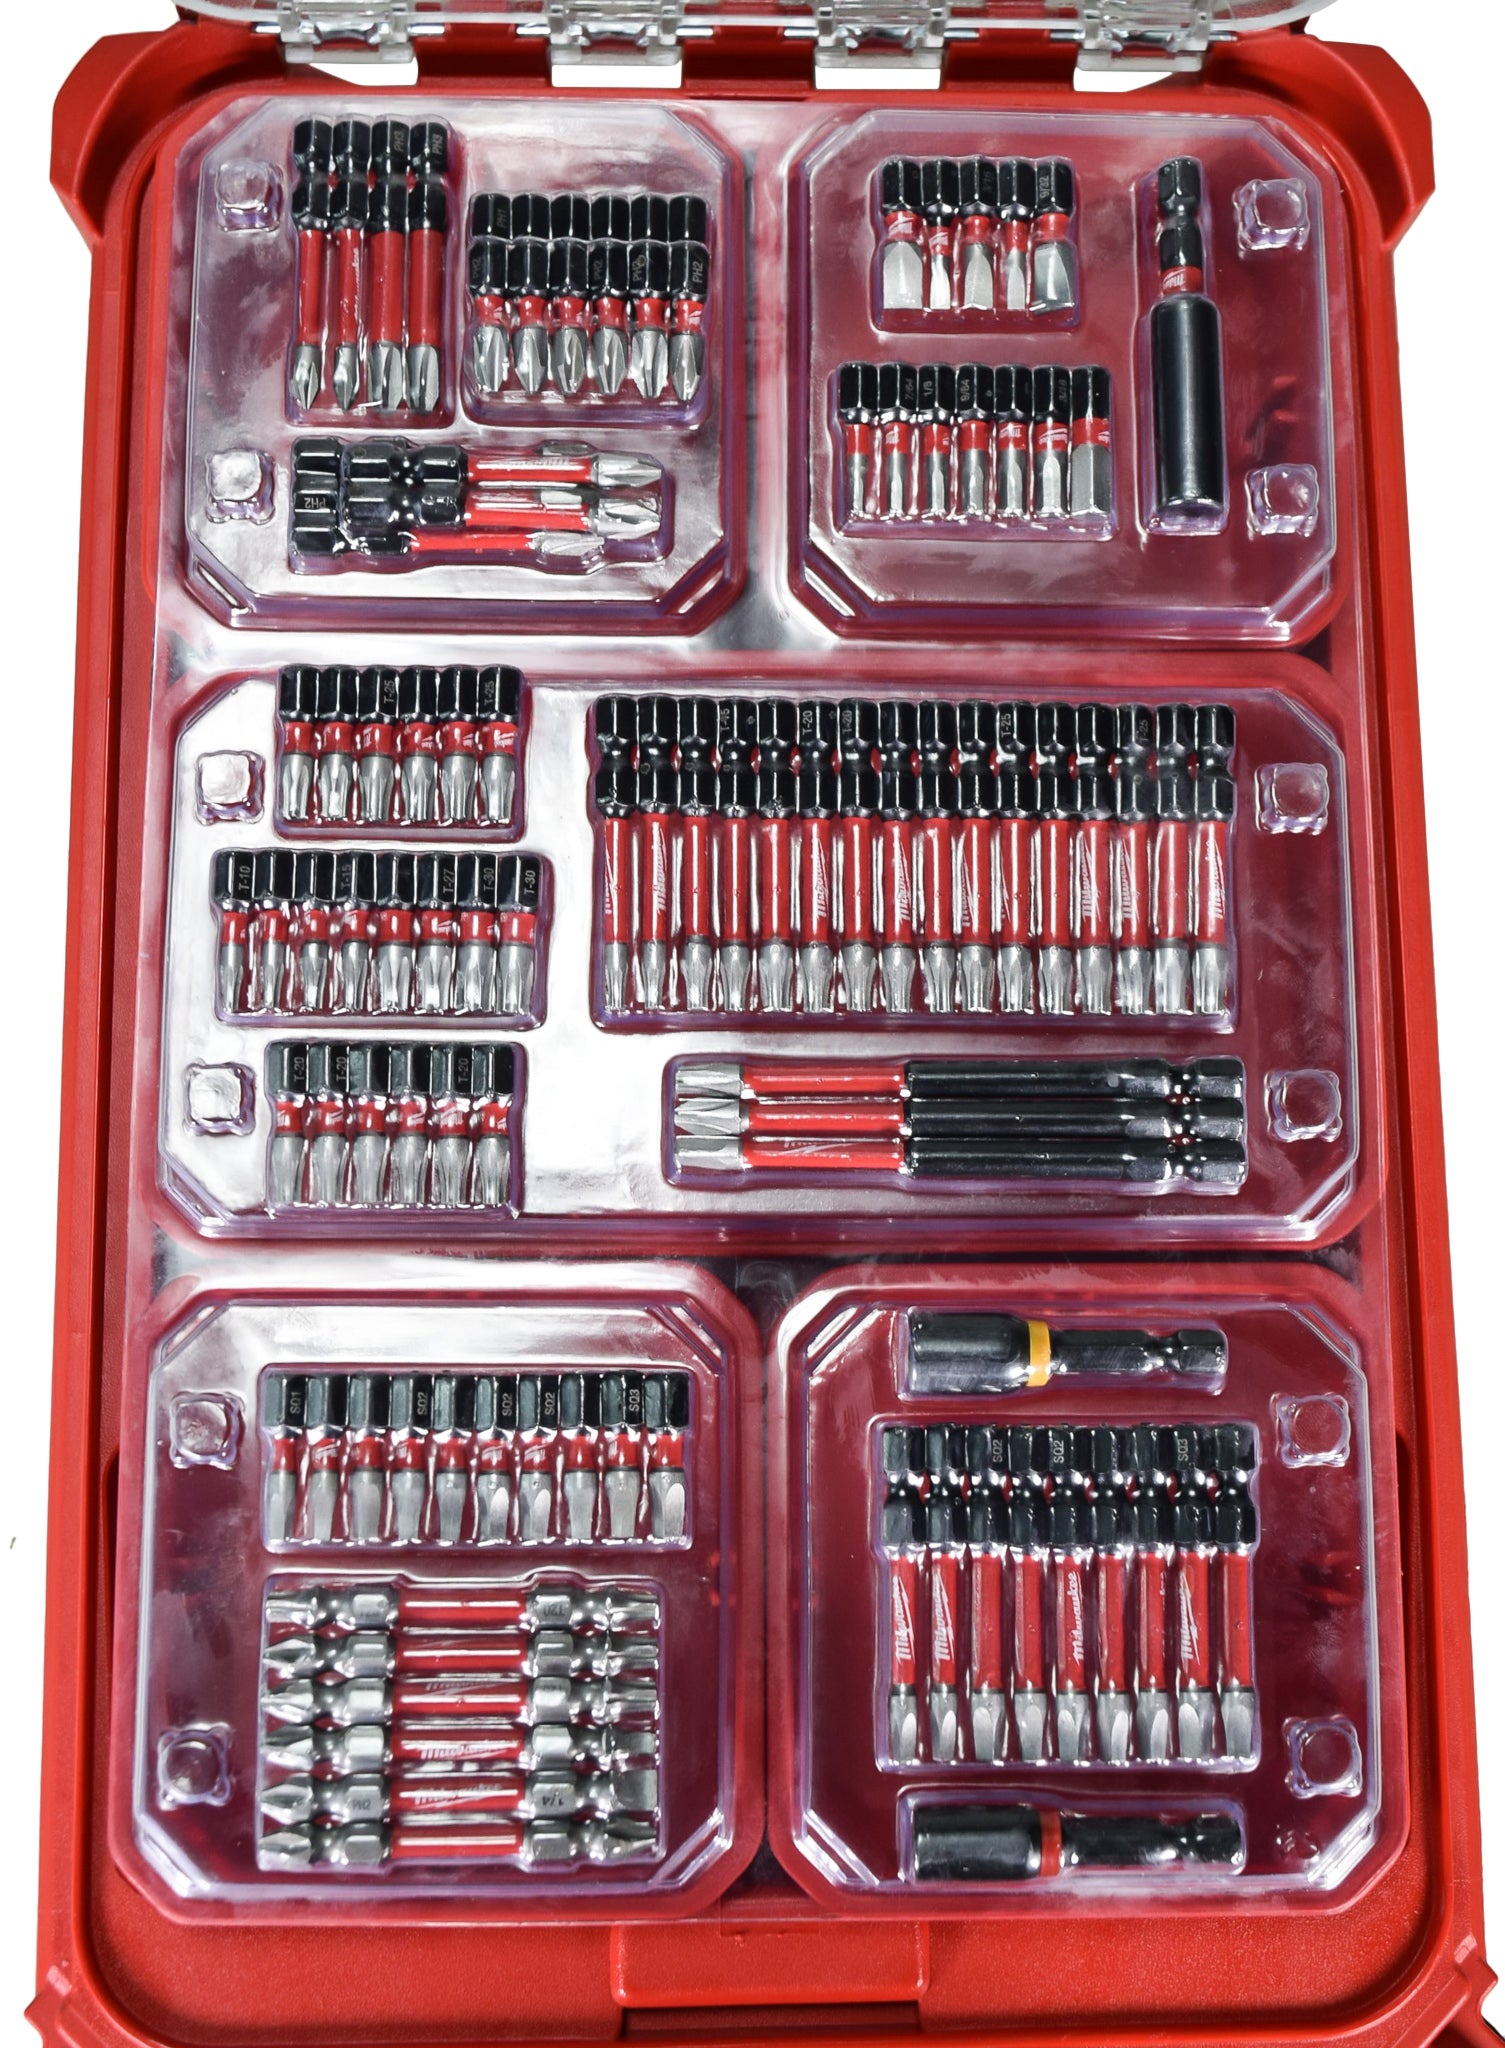 MilwaukeeTool 48-32-4082 Impact-Duty Alloy Steel Driver Bit Set with PACKOUT Case (100-Piece)